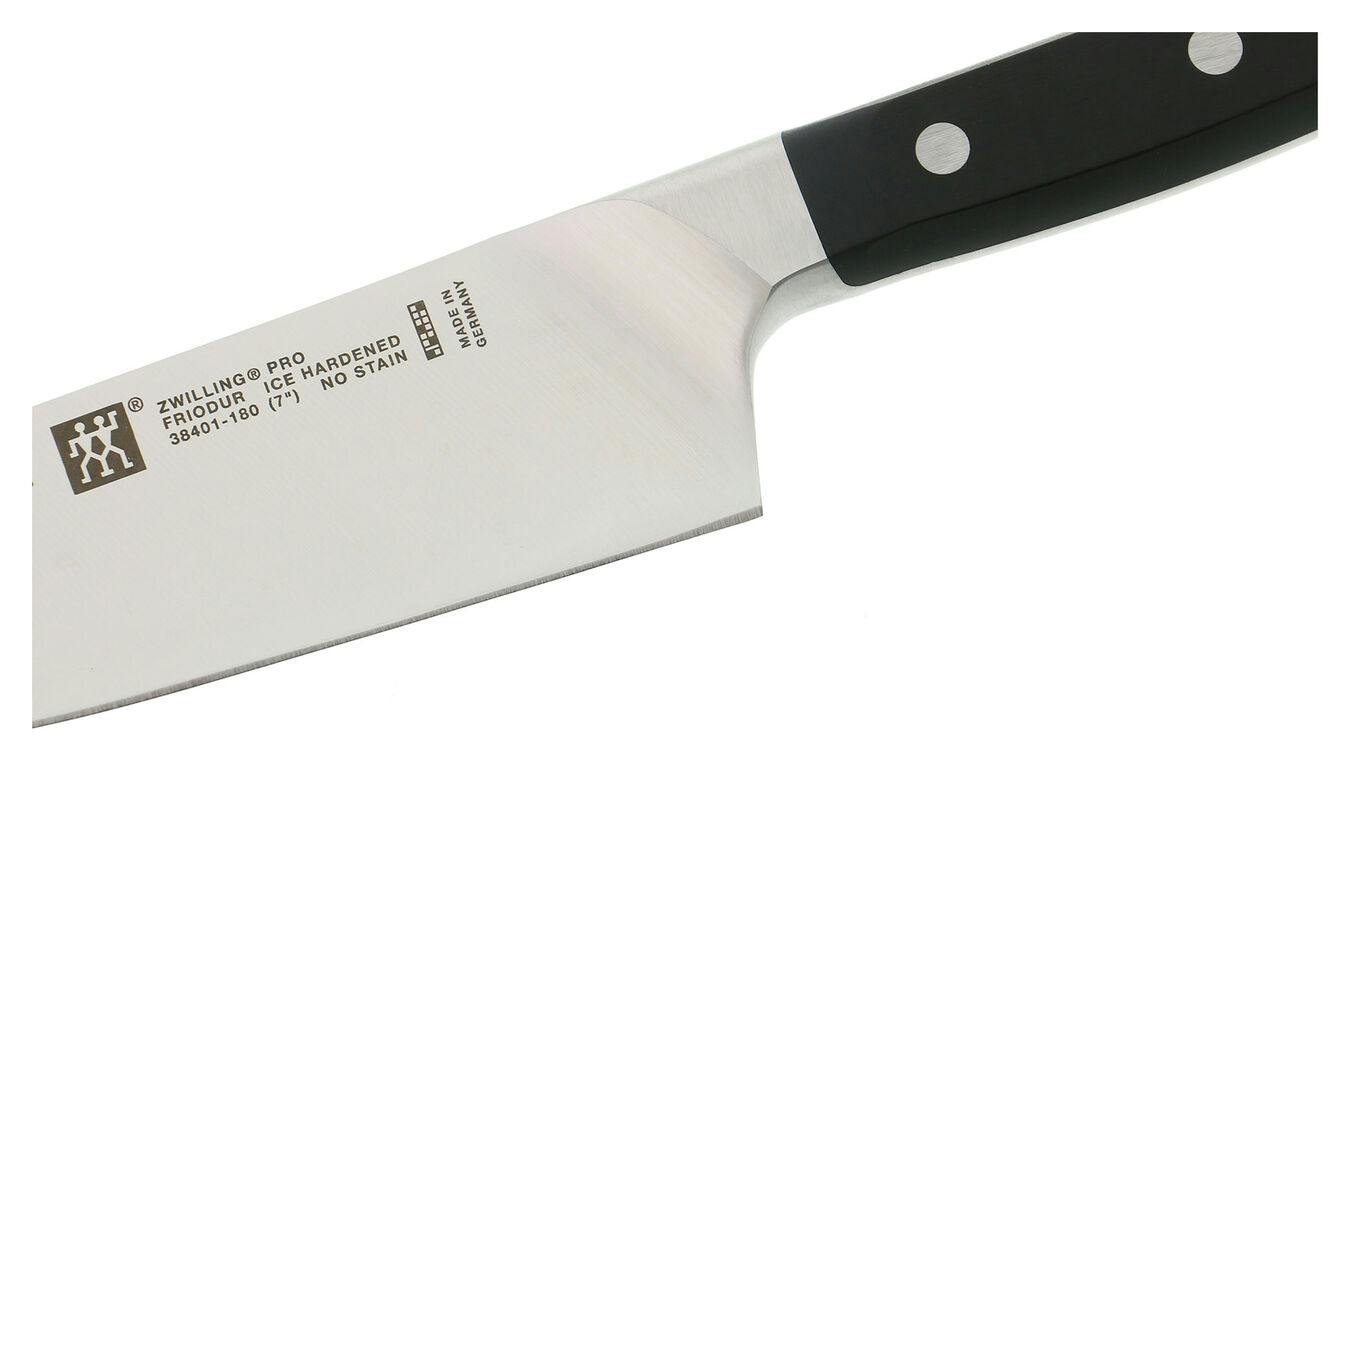 Zwilling Pro Chef's Knife, 6"